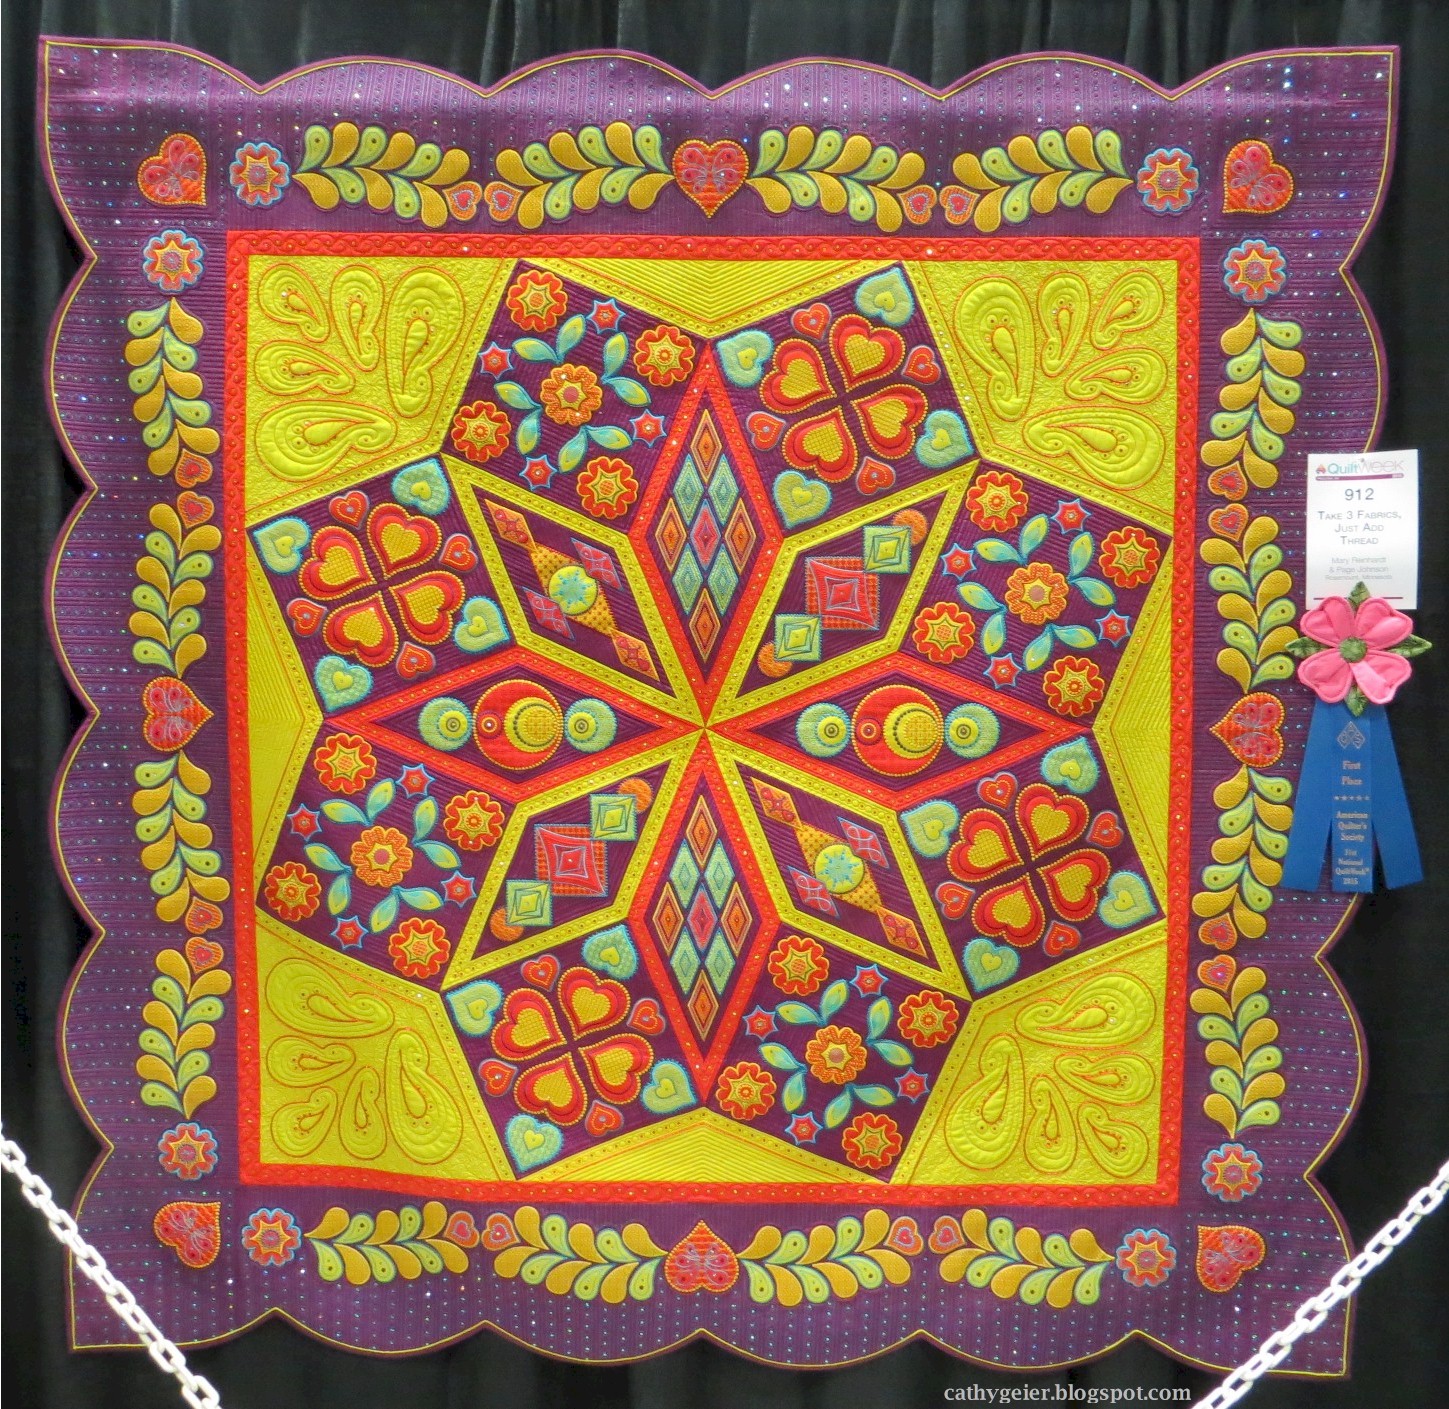 Cathy Geier's Quilty Art Blog: Swampingly Busy and Pics from Paducah